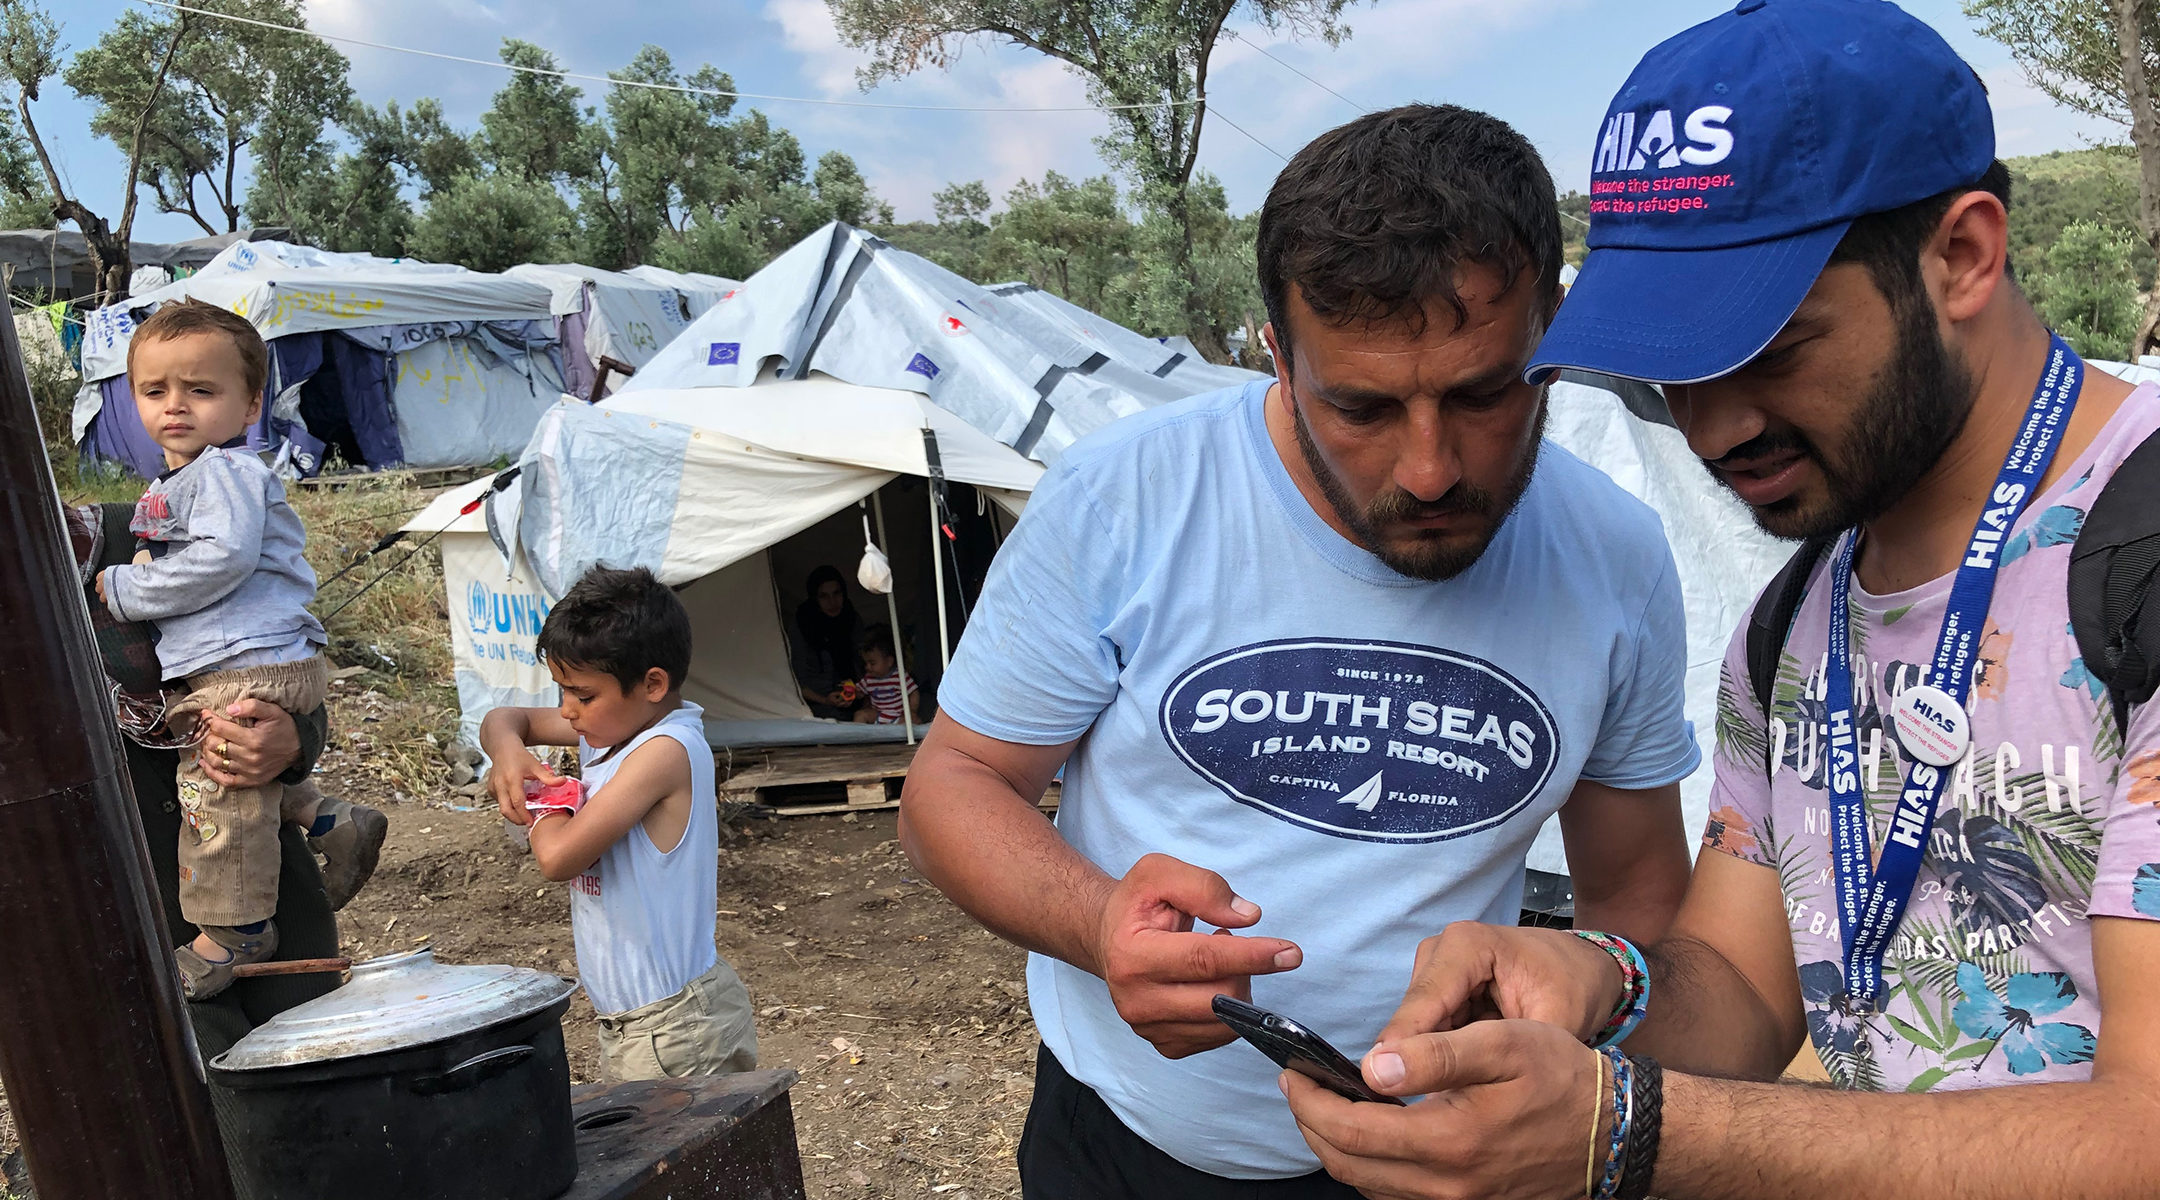 HIAS Greece translator Jalal Barezkai, right, assisting a Syrian refugee in an encampment near the Moria refugee camp on the island of Lesvos, Greece on May 9, 2018. (Bill Swersey/HIAS)